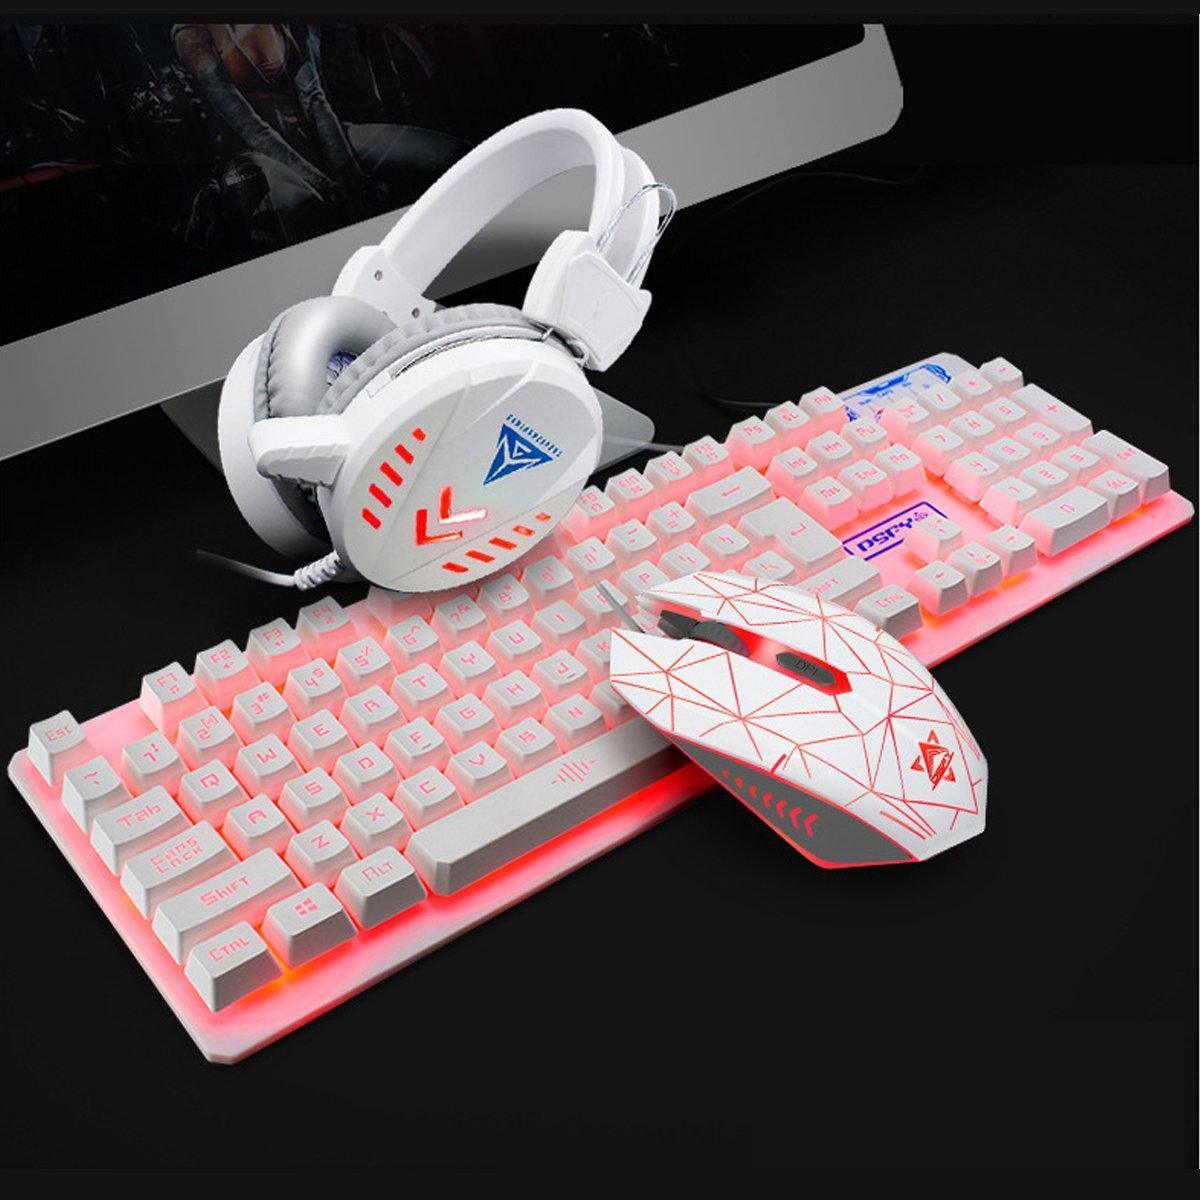 ezy2find Gaming Mouse Sets with Mouse Pad W 104Key Waterproof design USB Wired Multimedia RGB Backlit Mechanical Gaming Keyboard and LED Gaming Headphone and 3200DPI LED Gaming Mouse Sets with Mouse Pad